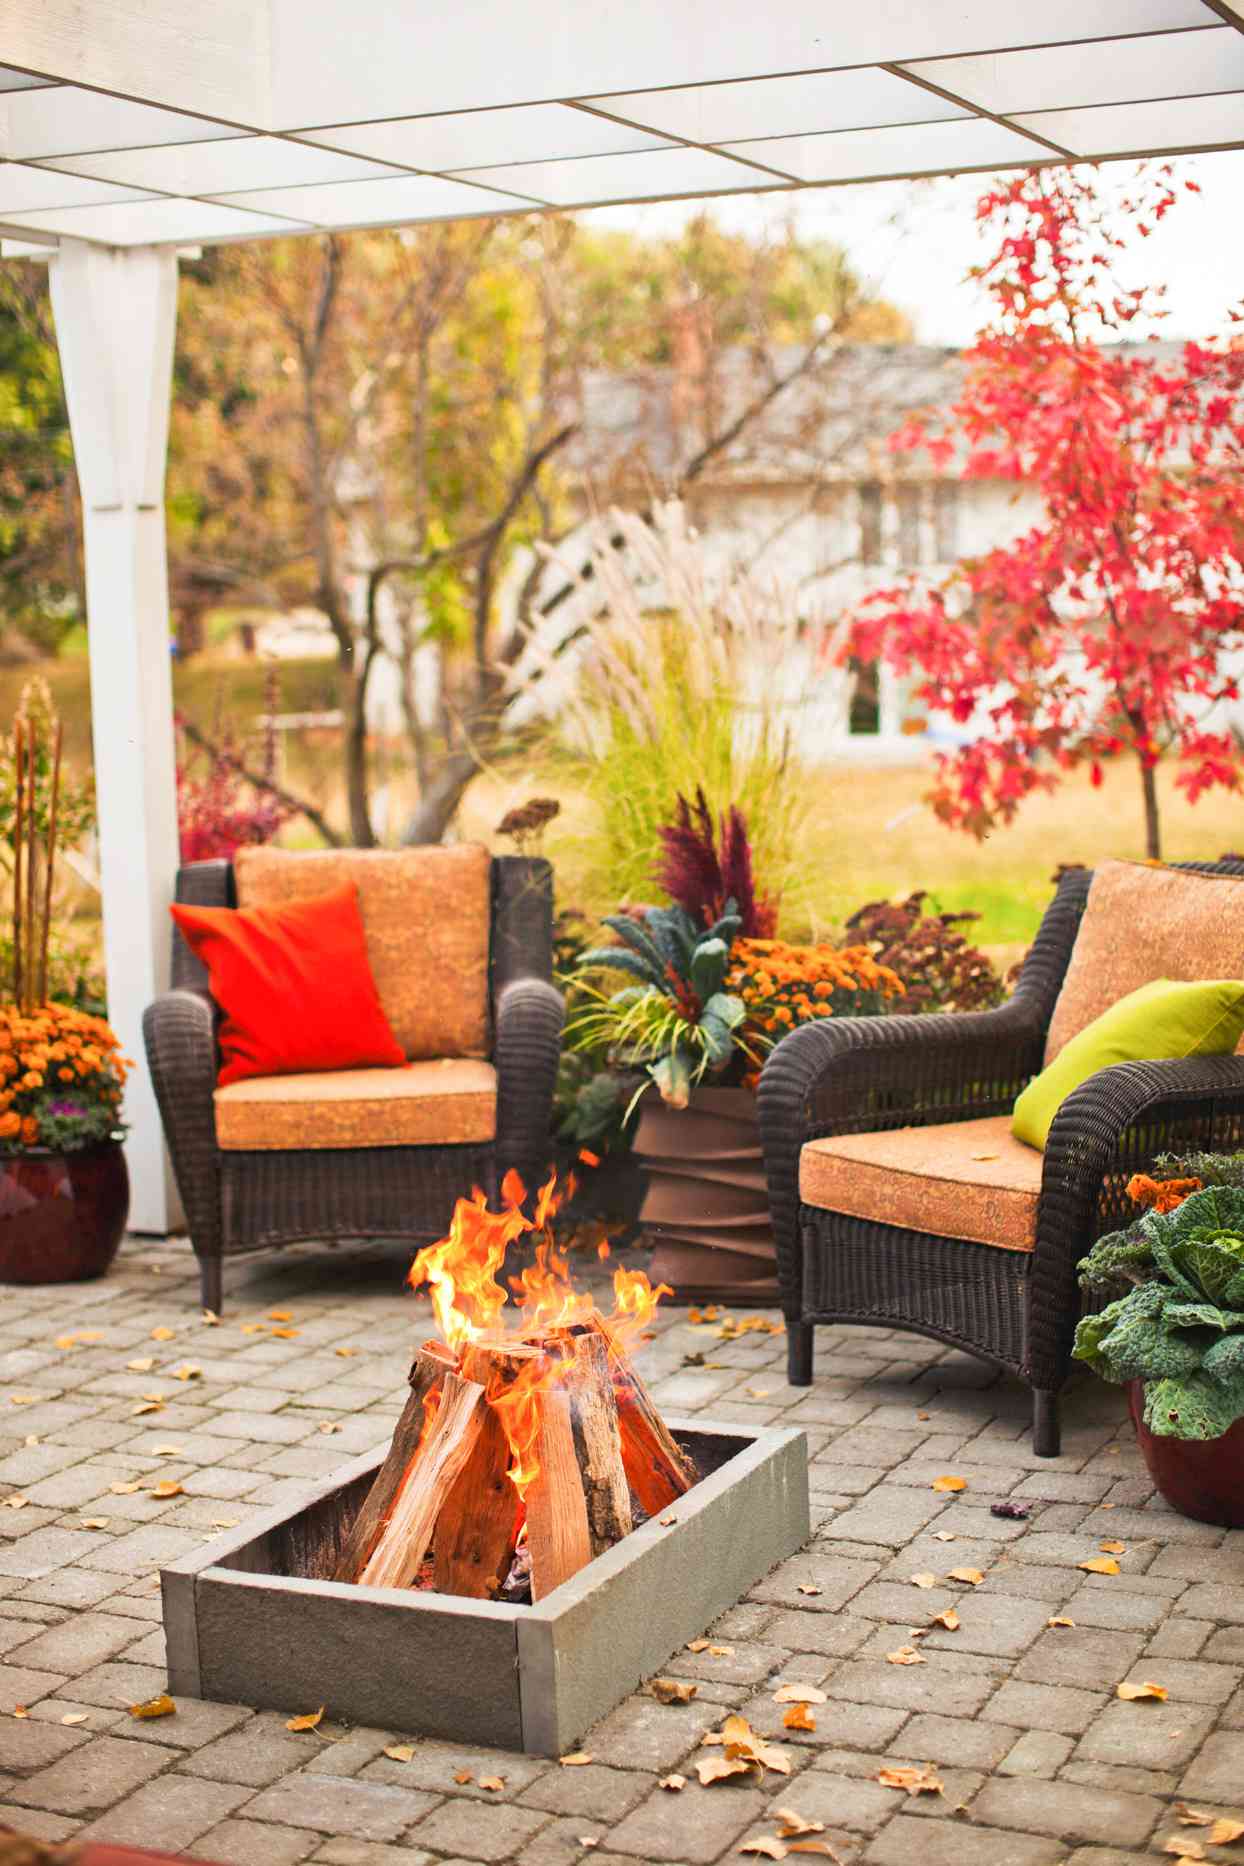 outdoor covered area with chairs and fire pit